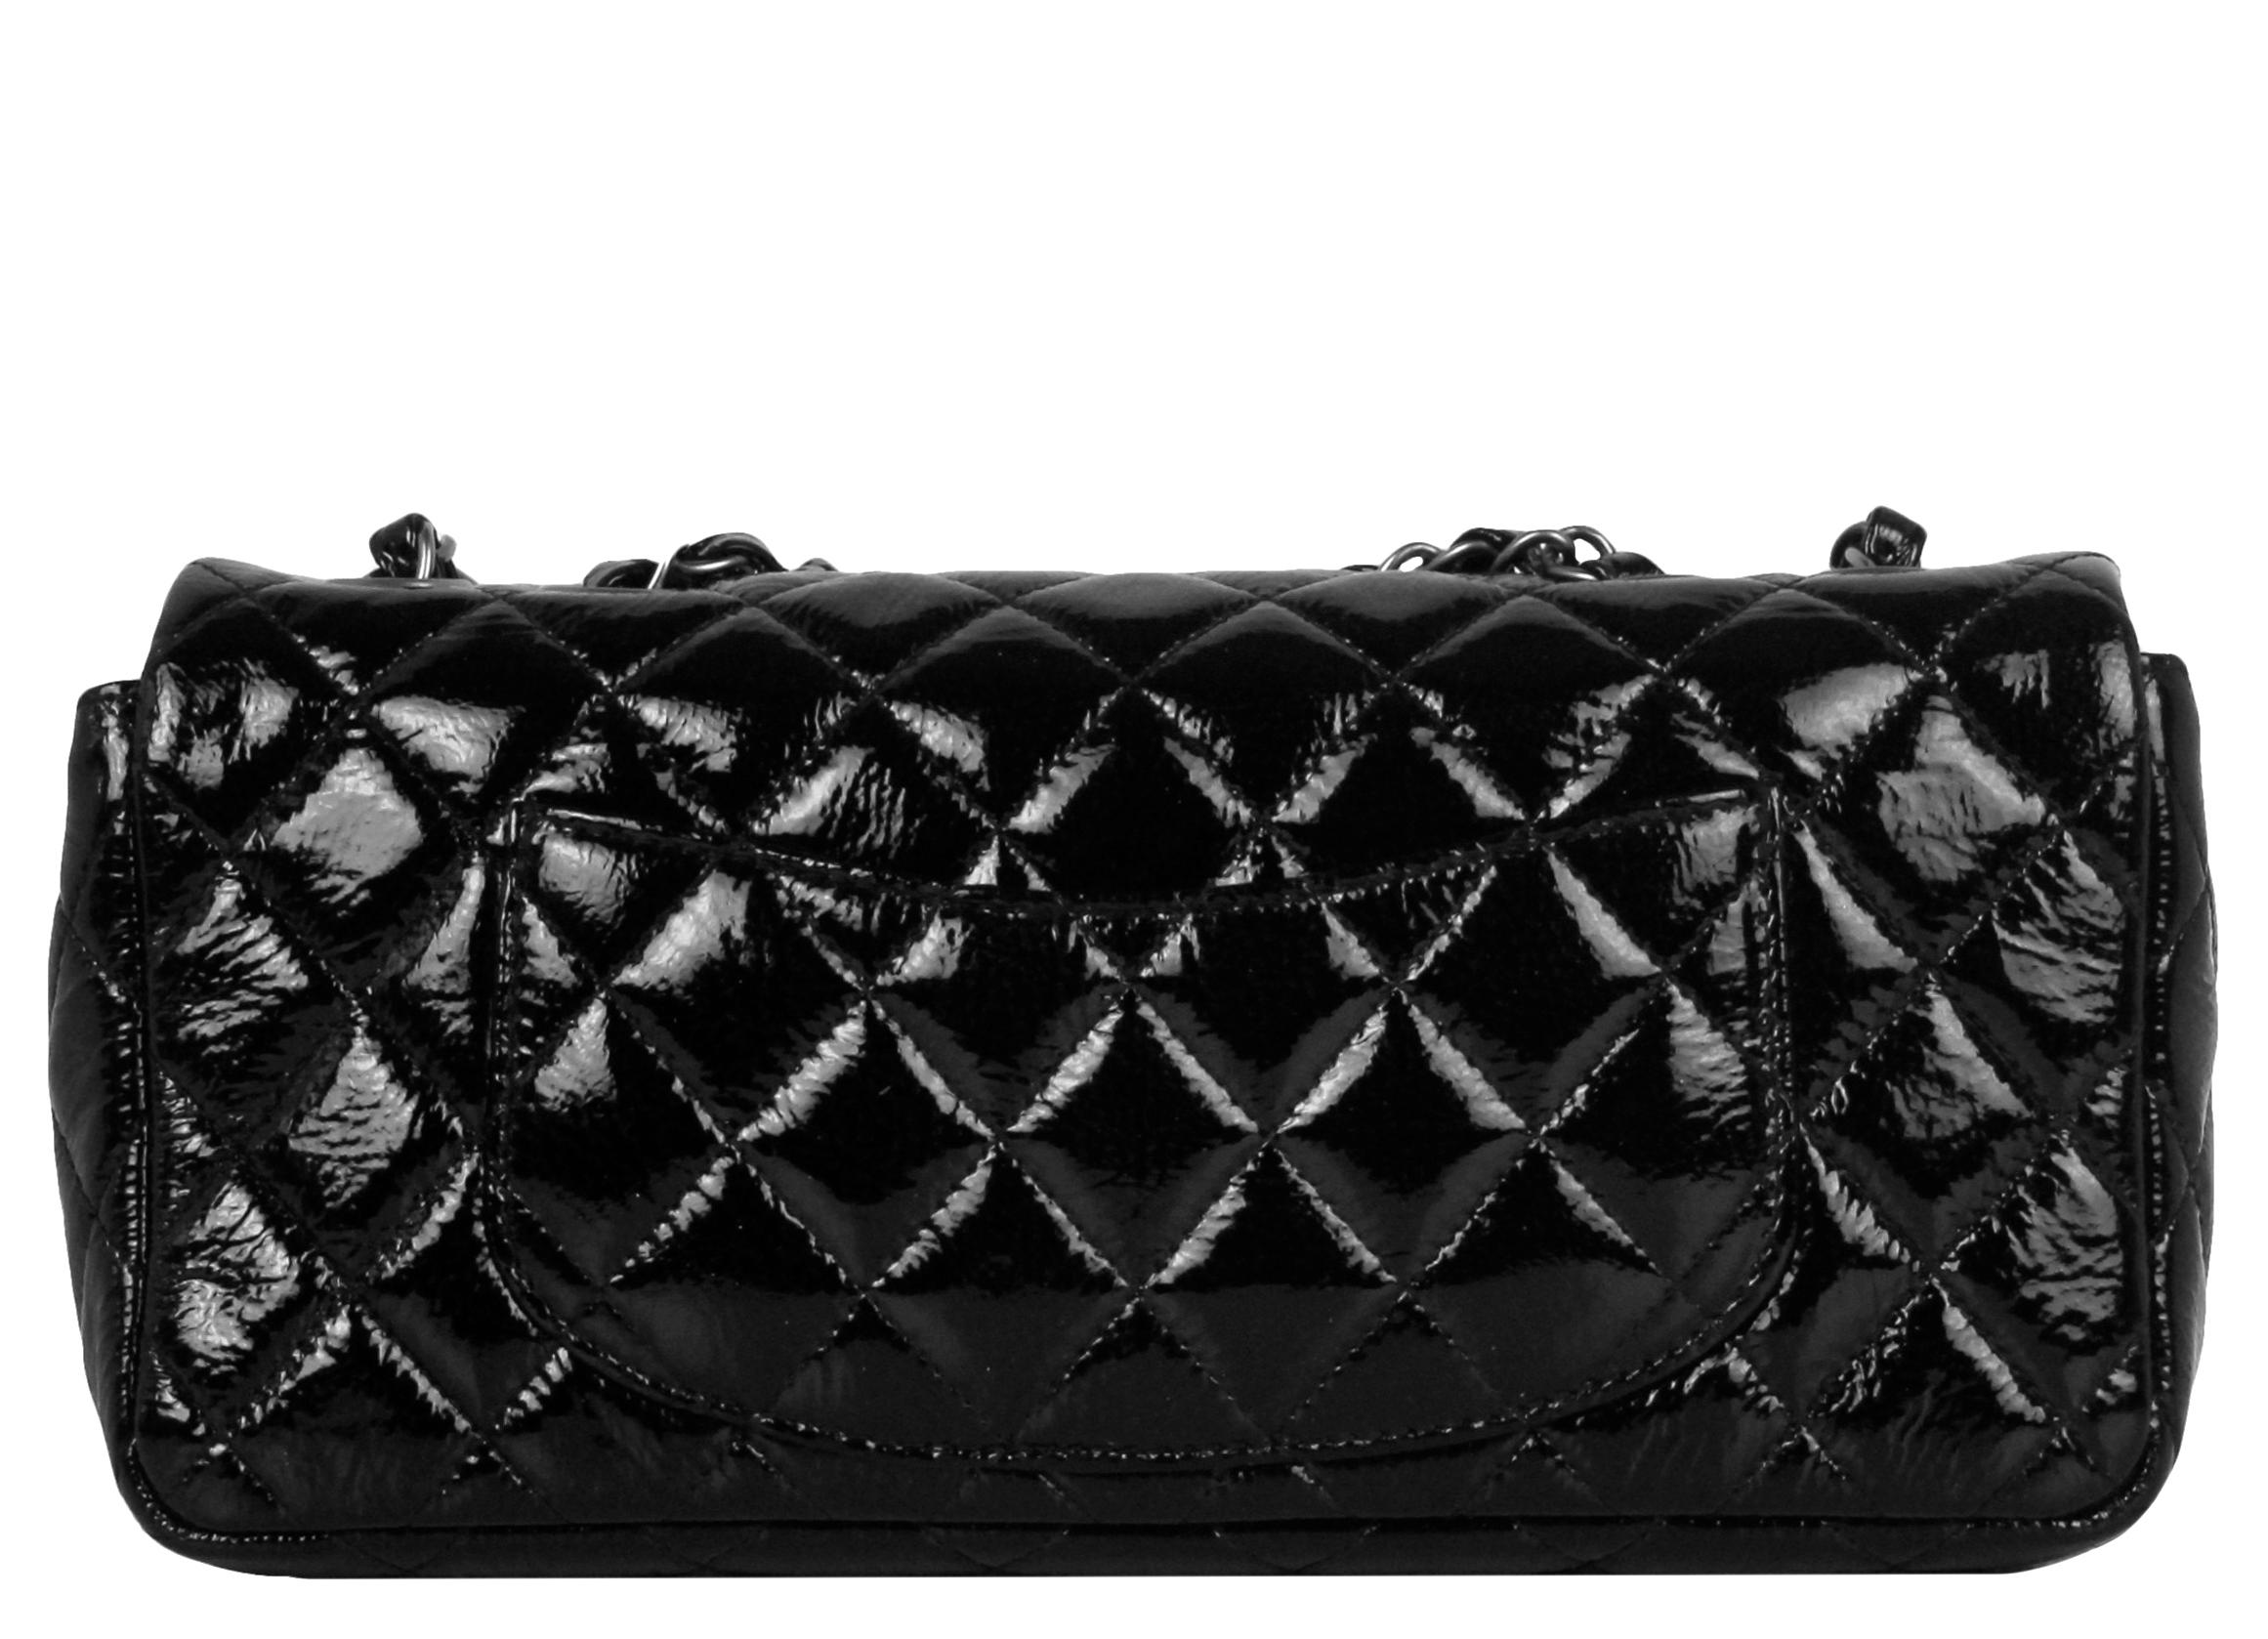 Women's Chanel Black Distressed Patent Quilted East West Flap Bag